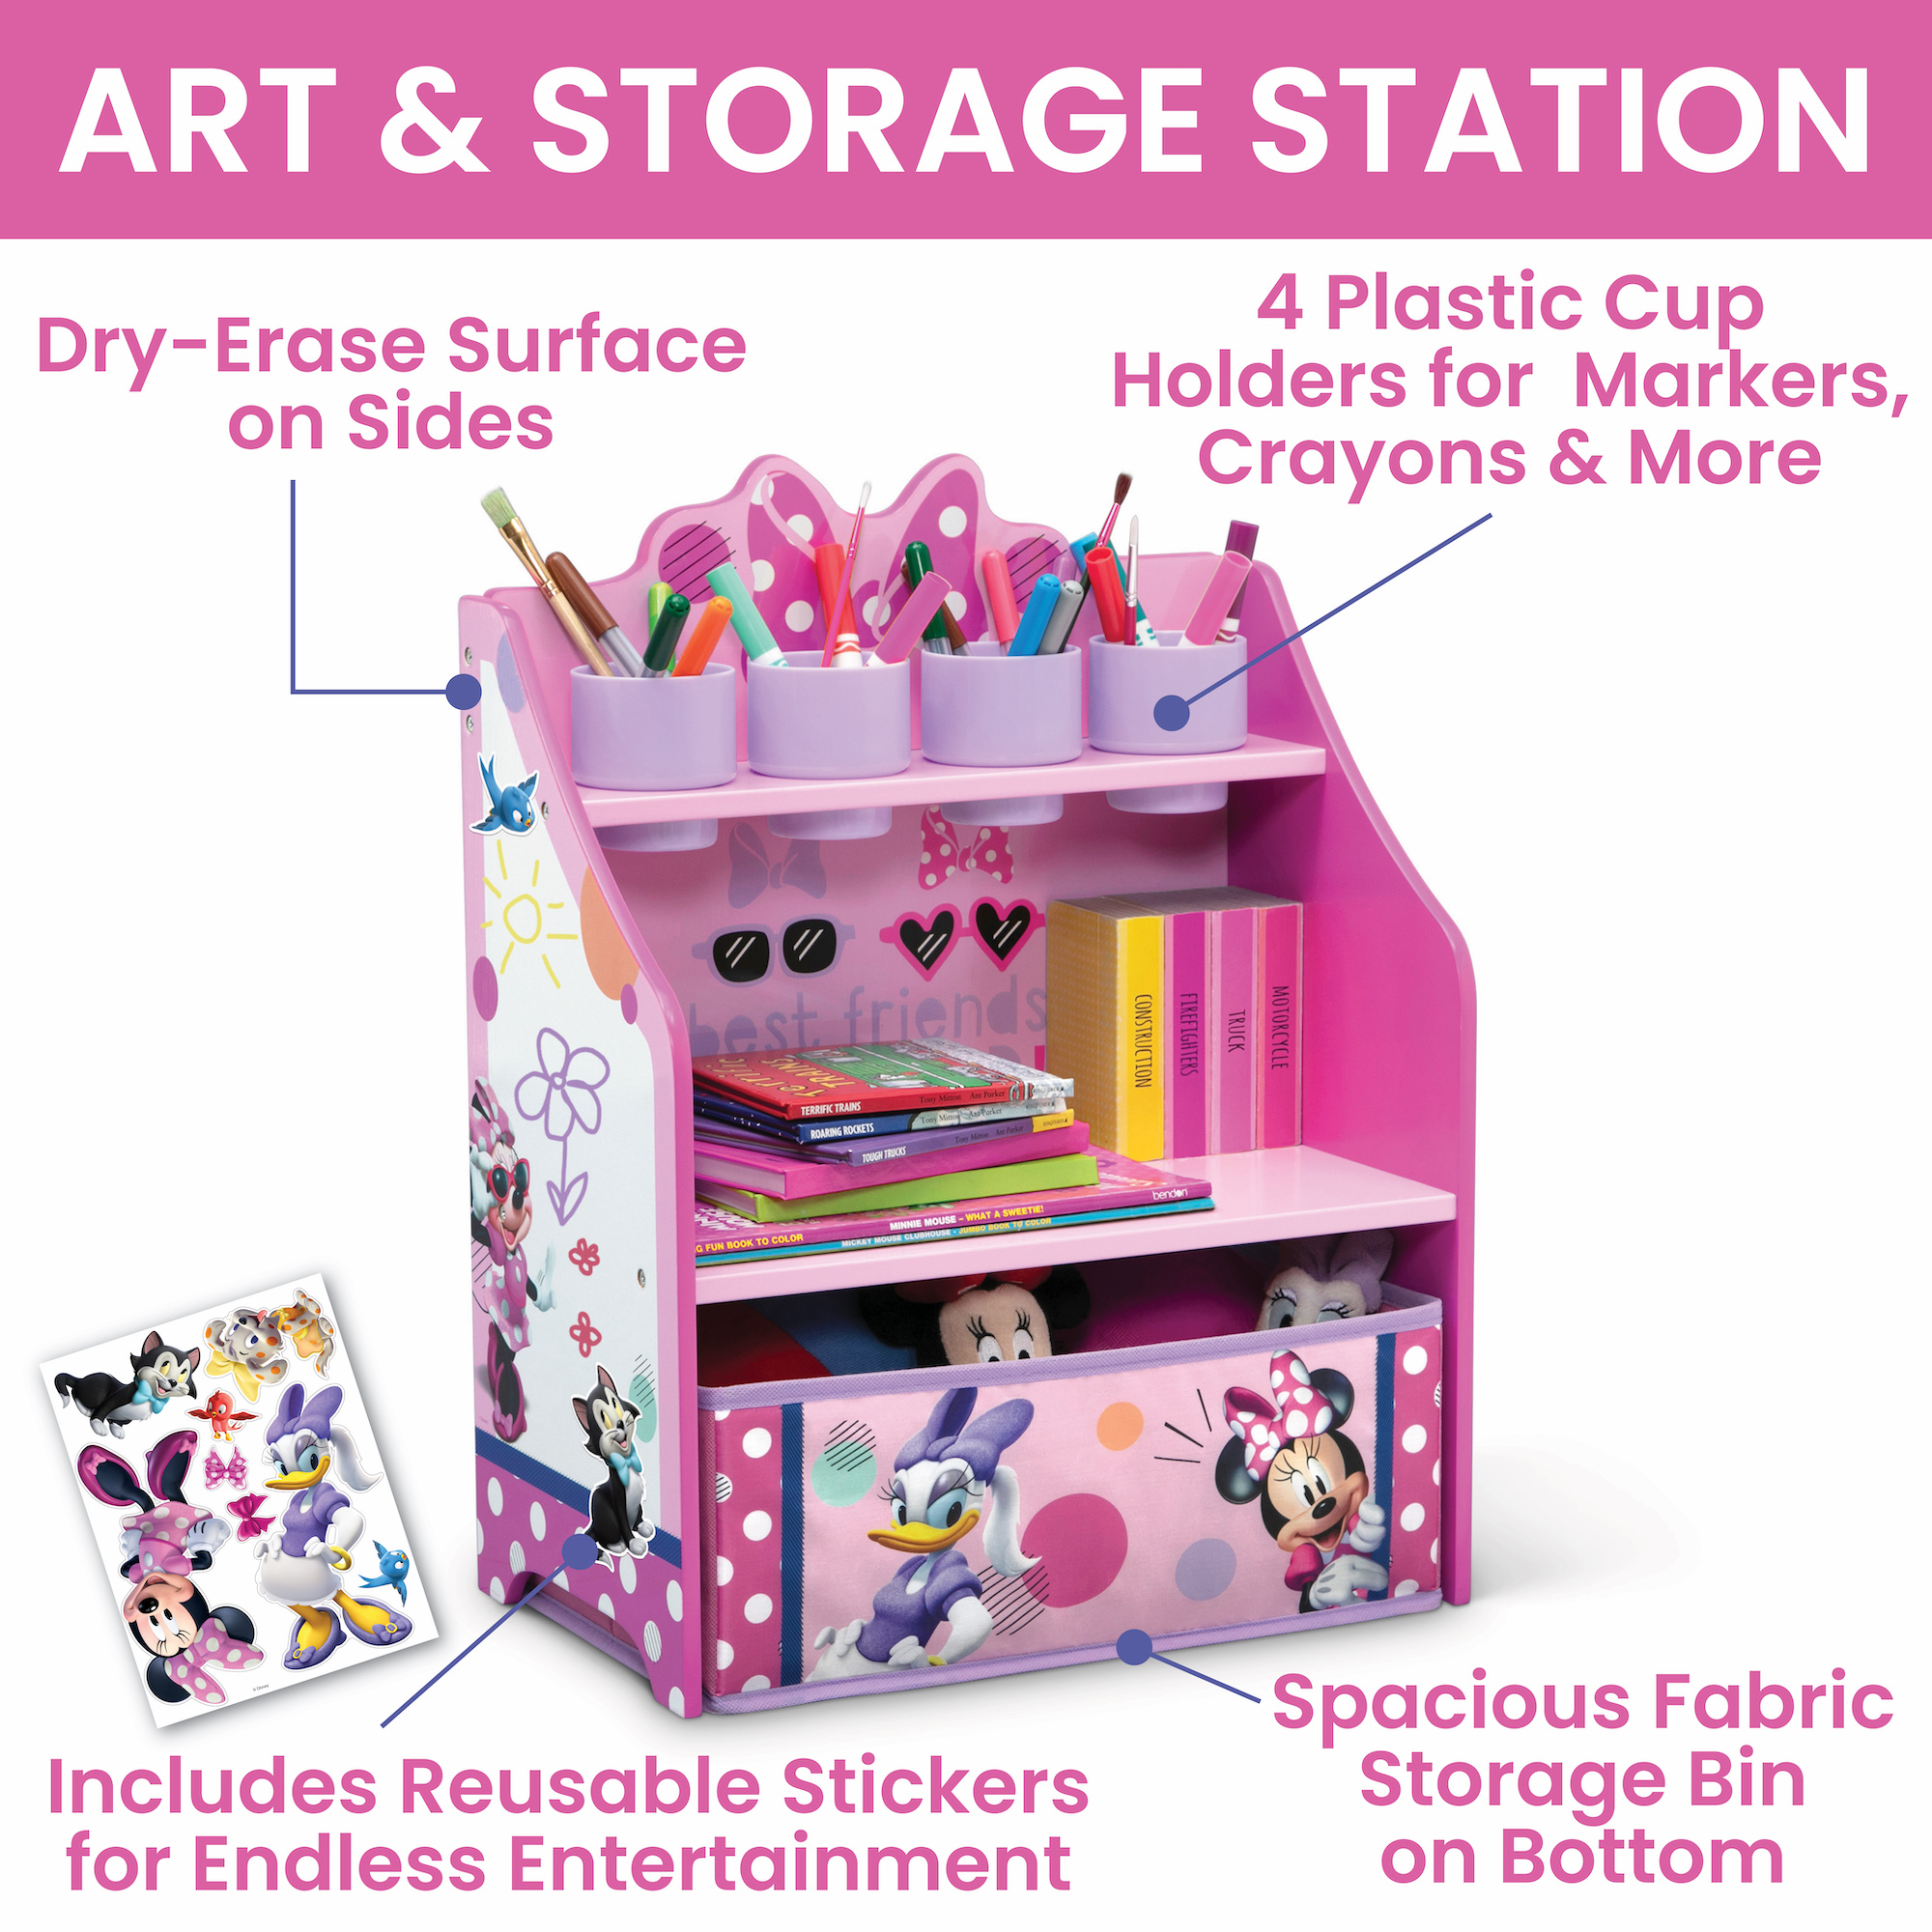 Minnie Mouse 3-Piece Art & Play Toddler Room-in-a-Box by Delta Children – Includes Draw & Play Desk, Art & Storage Station & Fabric Toy Box, Pink - image 5 of 11